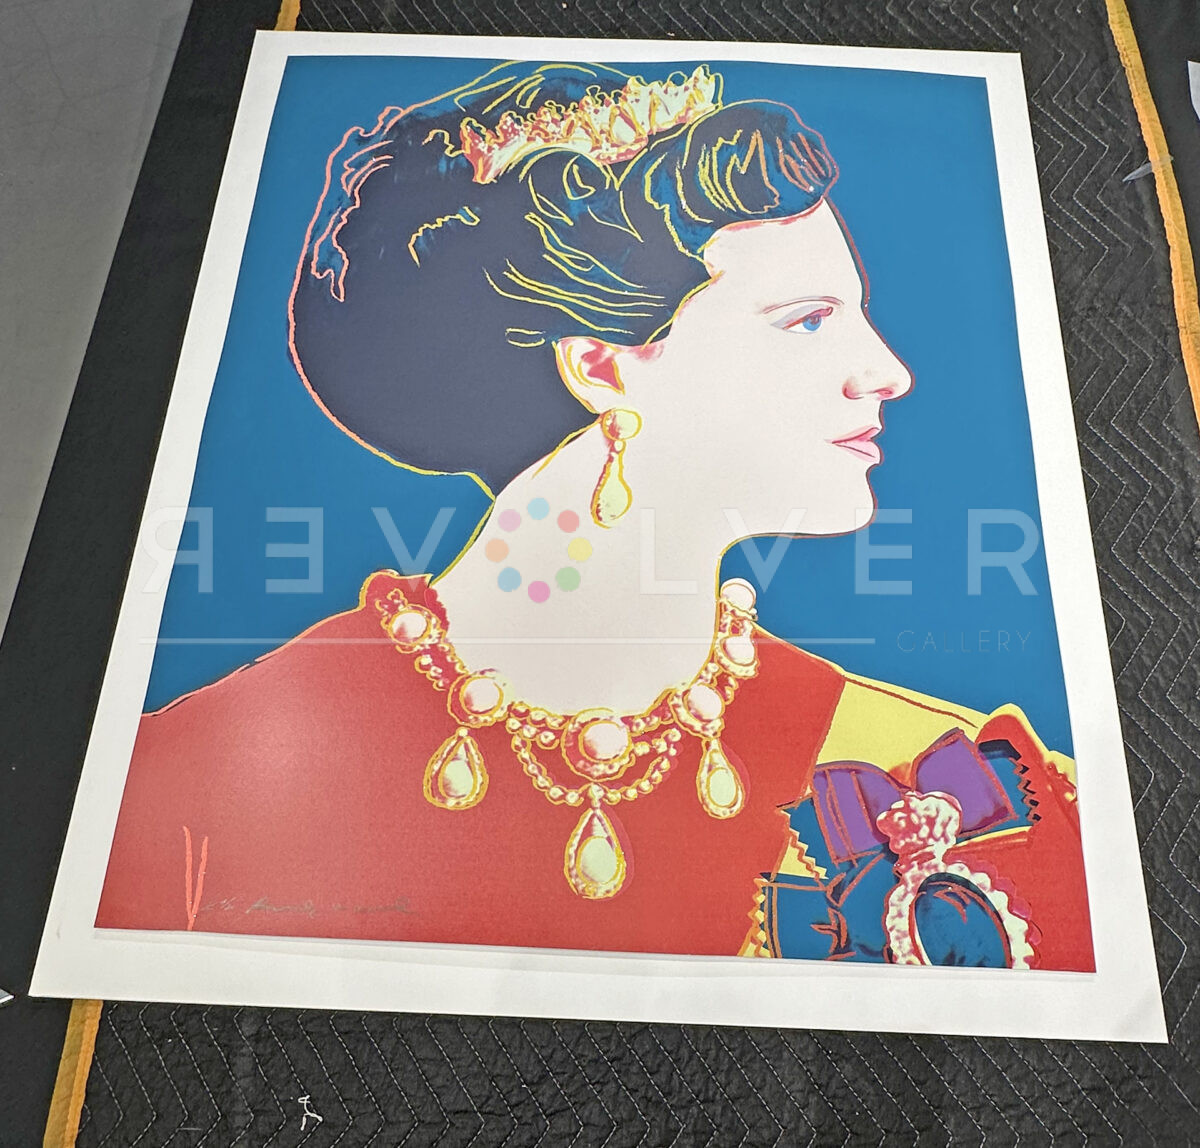 Queen Margrethe 343 (Royal Edition) by Andy Warhol out of a frame